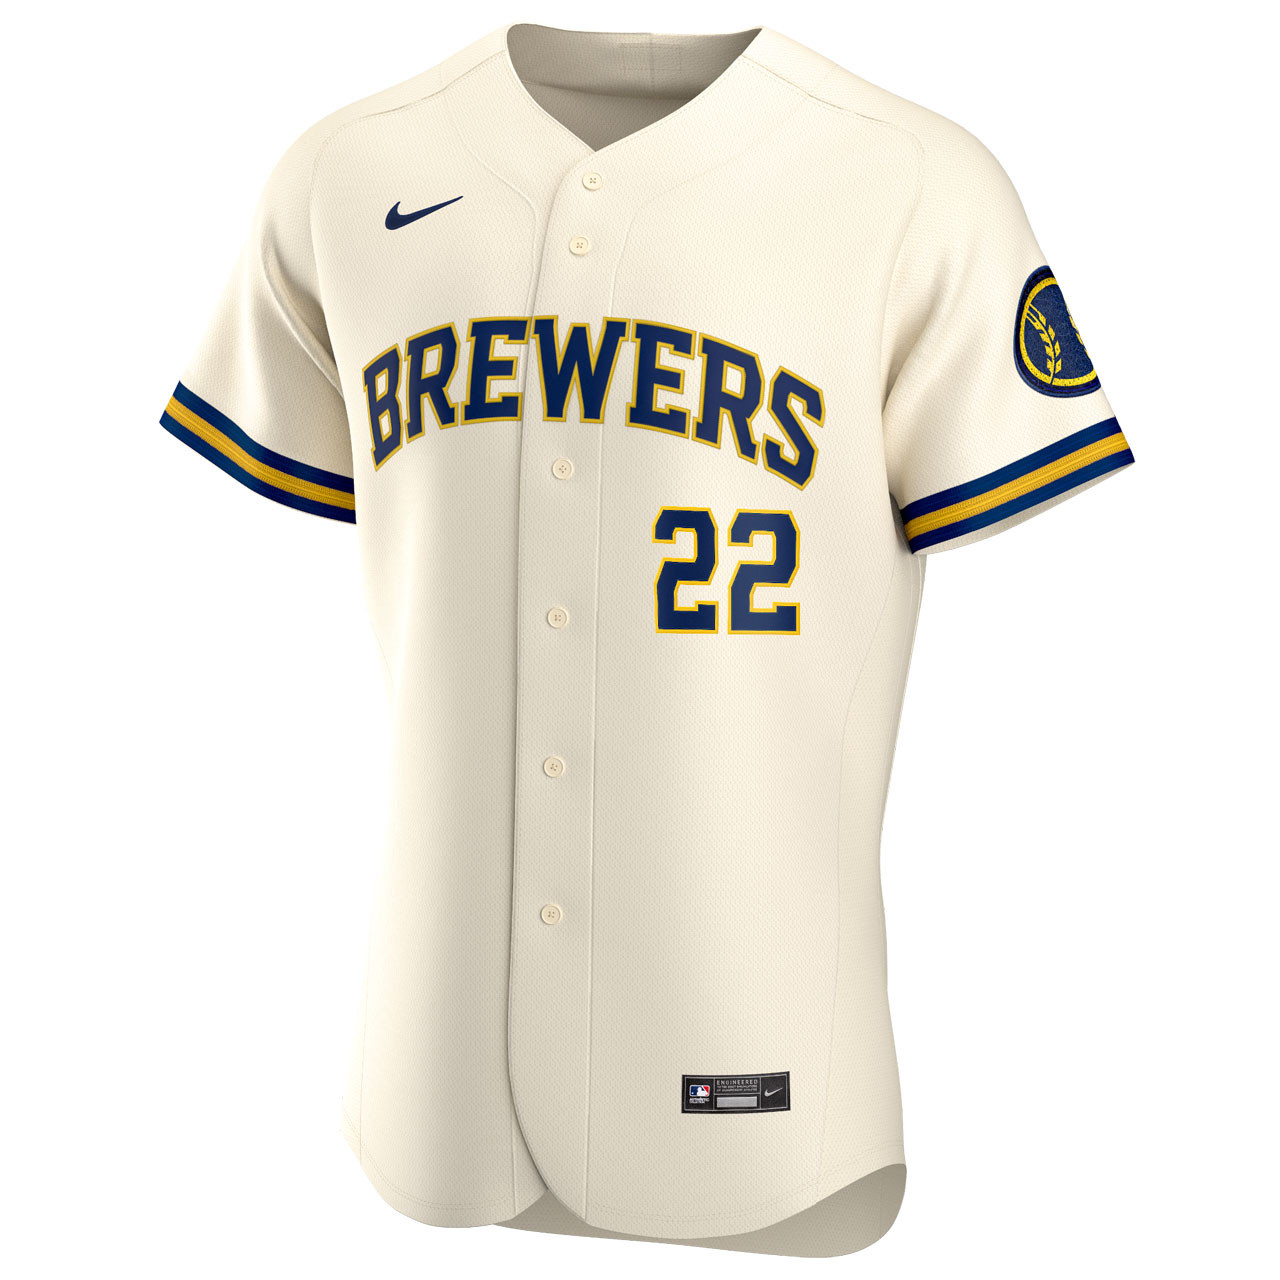 Christian Yelich Milwaukee Brewers Home Authentic Jersey by Nike